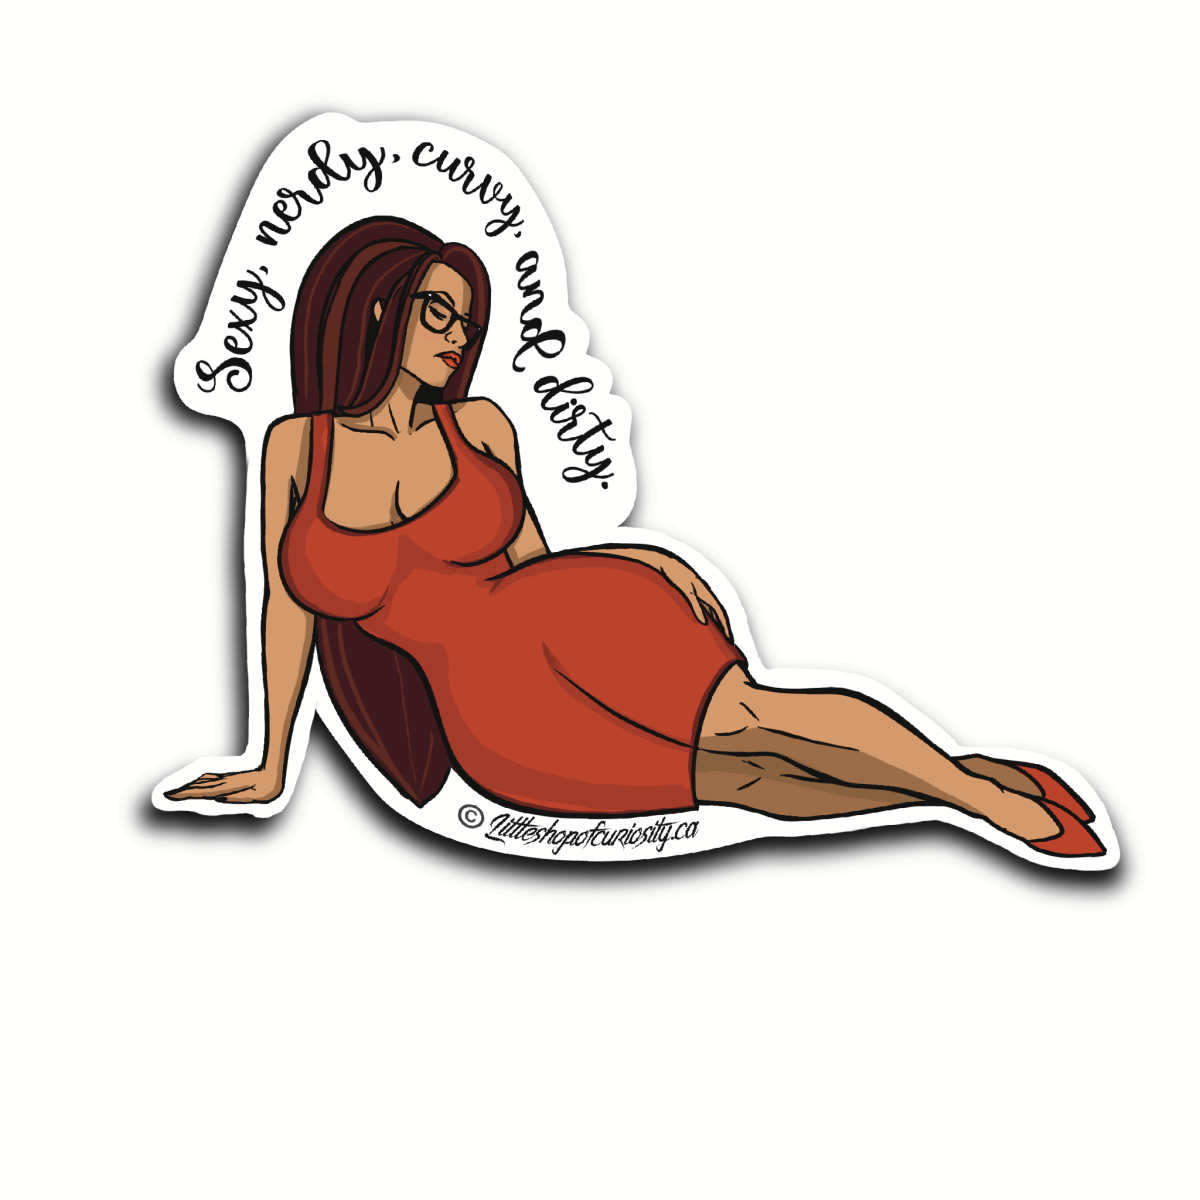 Sexy, Nerdy, Curvy, and Dirty Sticker - Colour Sticker - Little Shop of Curiosity